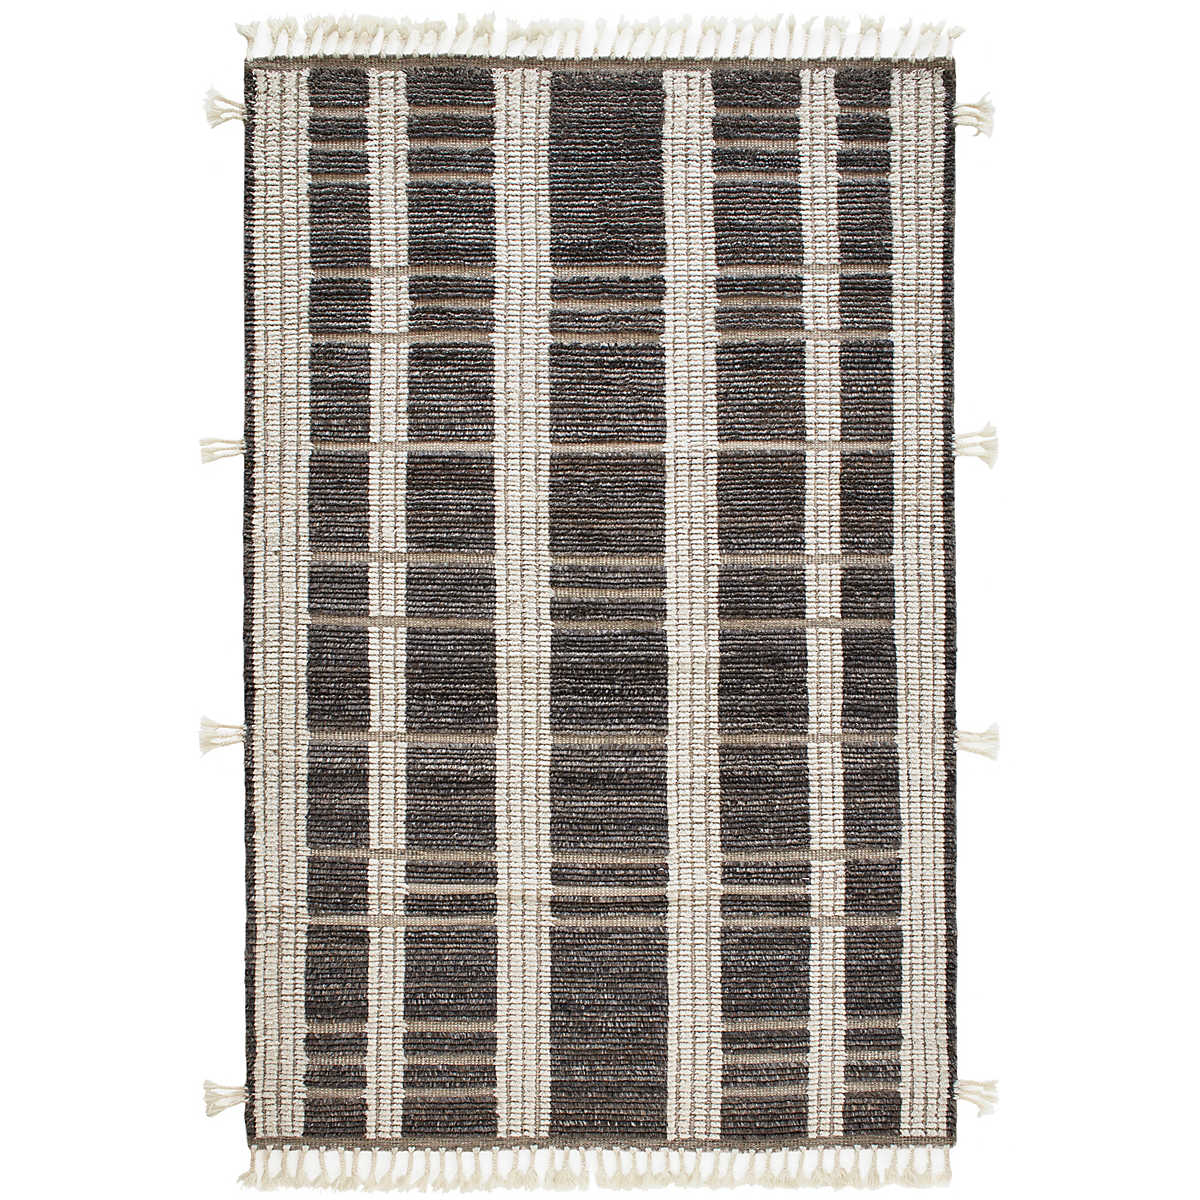 The Tory Grey/Ivory Rug stripes of Ivory fleece alternate with raised bands of naturally colored, mélange Charcoal wool. Interspersed by low-profile, woven taupe boundaries that bring rhythm to the textural blocks. Length sides are lightened with funky, bohemian braided tassels that add whimsy. Amethyst Home provides interior design services, furniture, rugs, and lighting in the Seattle metro area.